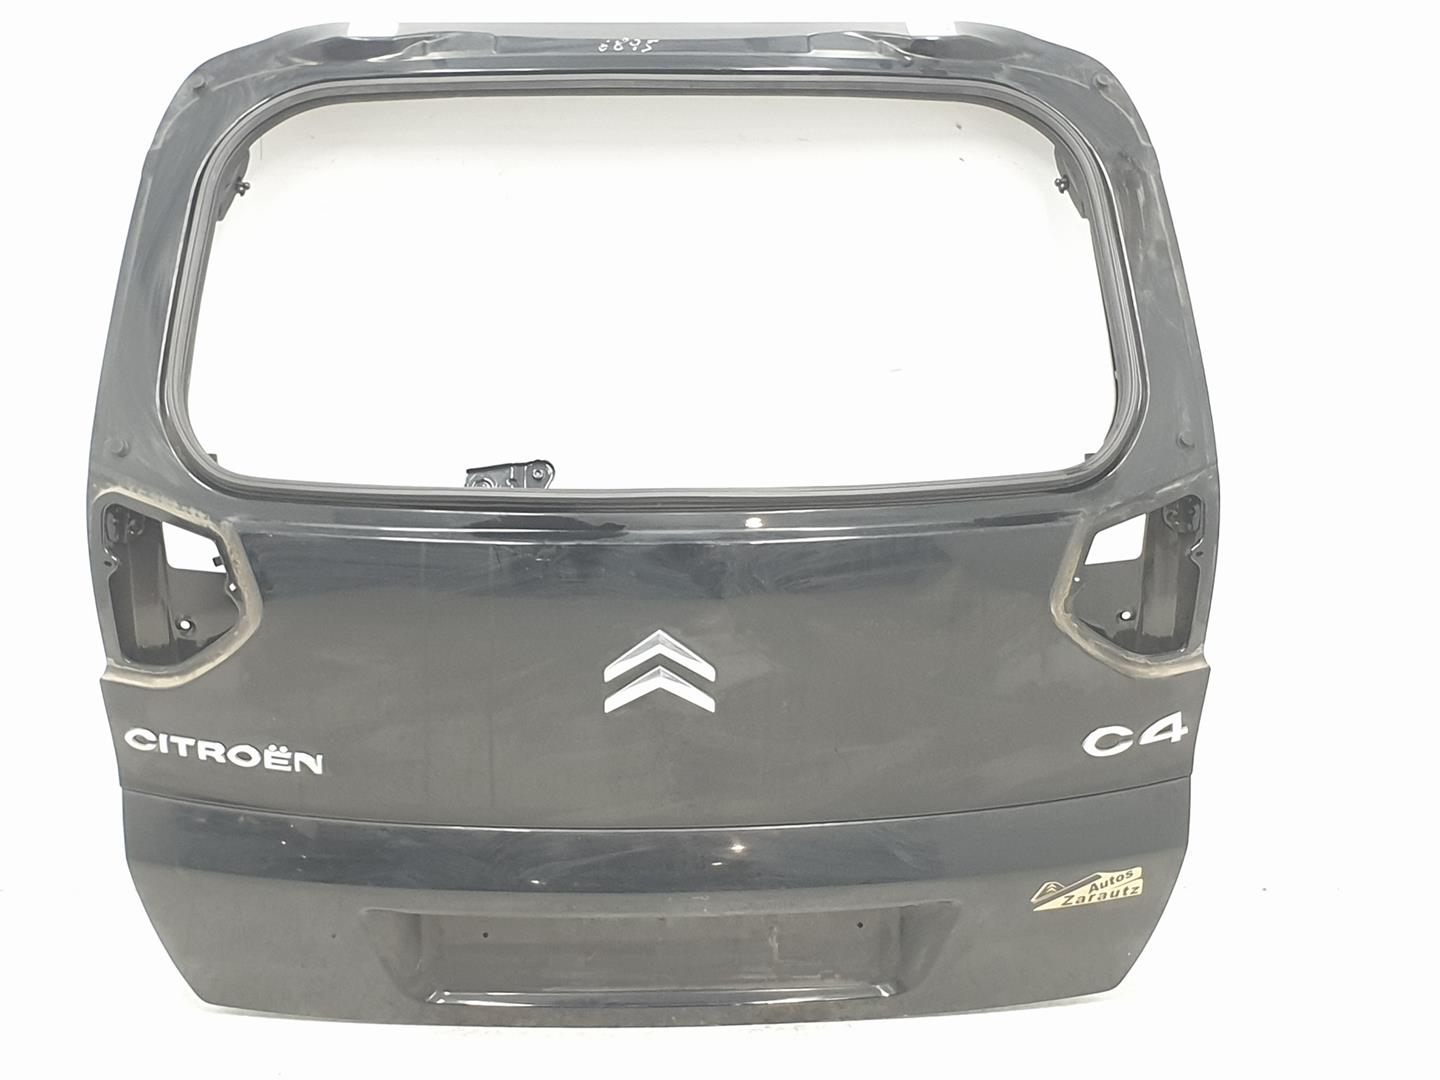 CITROËN C4 Picasso 1 generation (2006-2013) Bootlid Rear Boot 8701W8, 8701W8, COLORNEGROONICEEXY 24245195